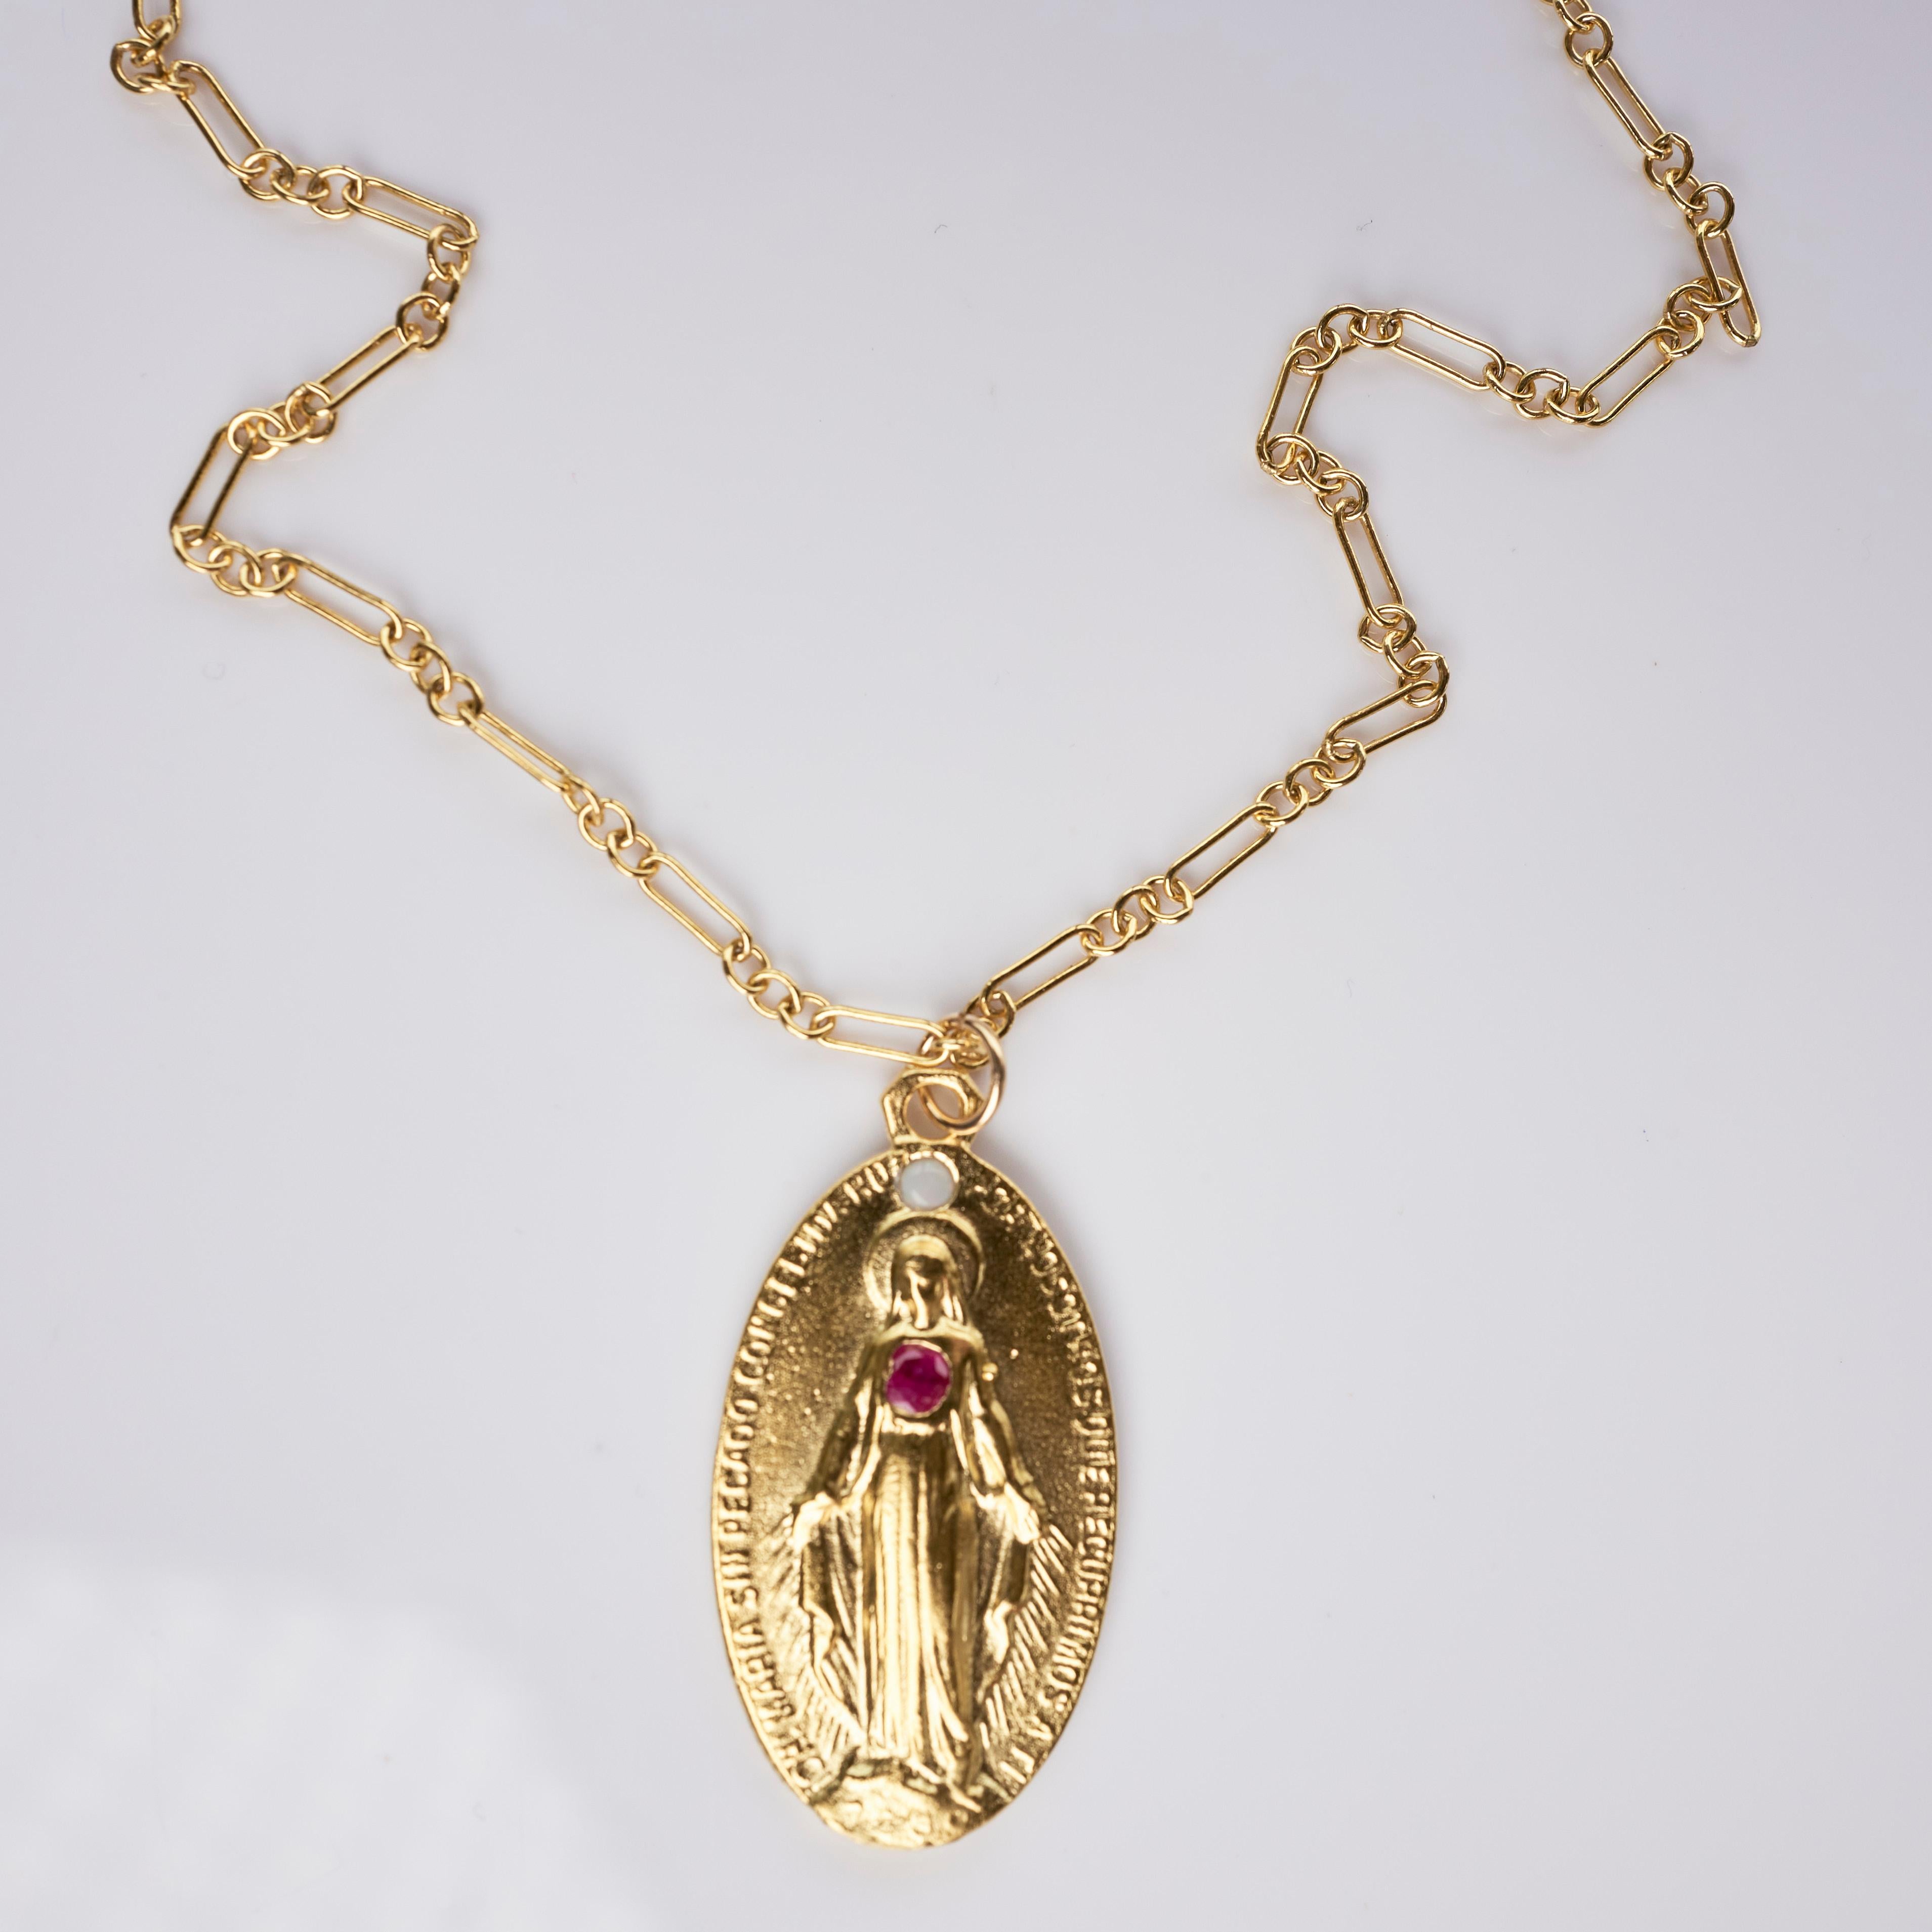 Contemporary Virgin Mary Medal Chain Necklace Ruby Opal J Dauphin For Sale